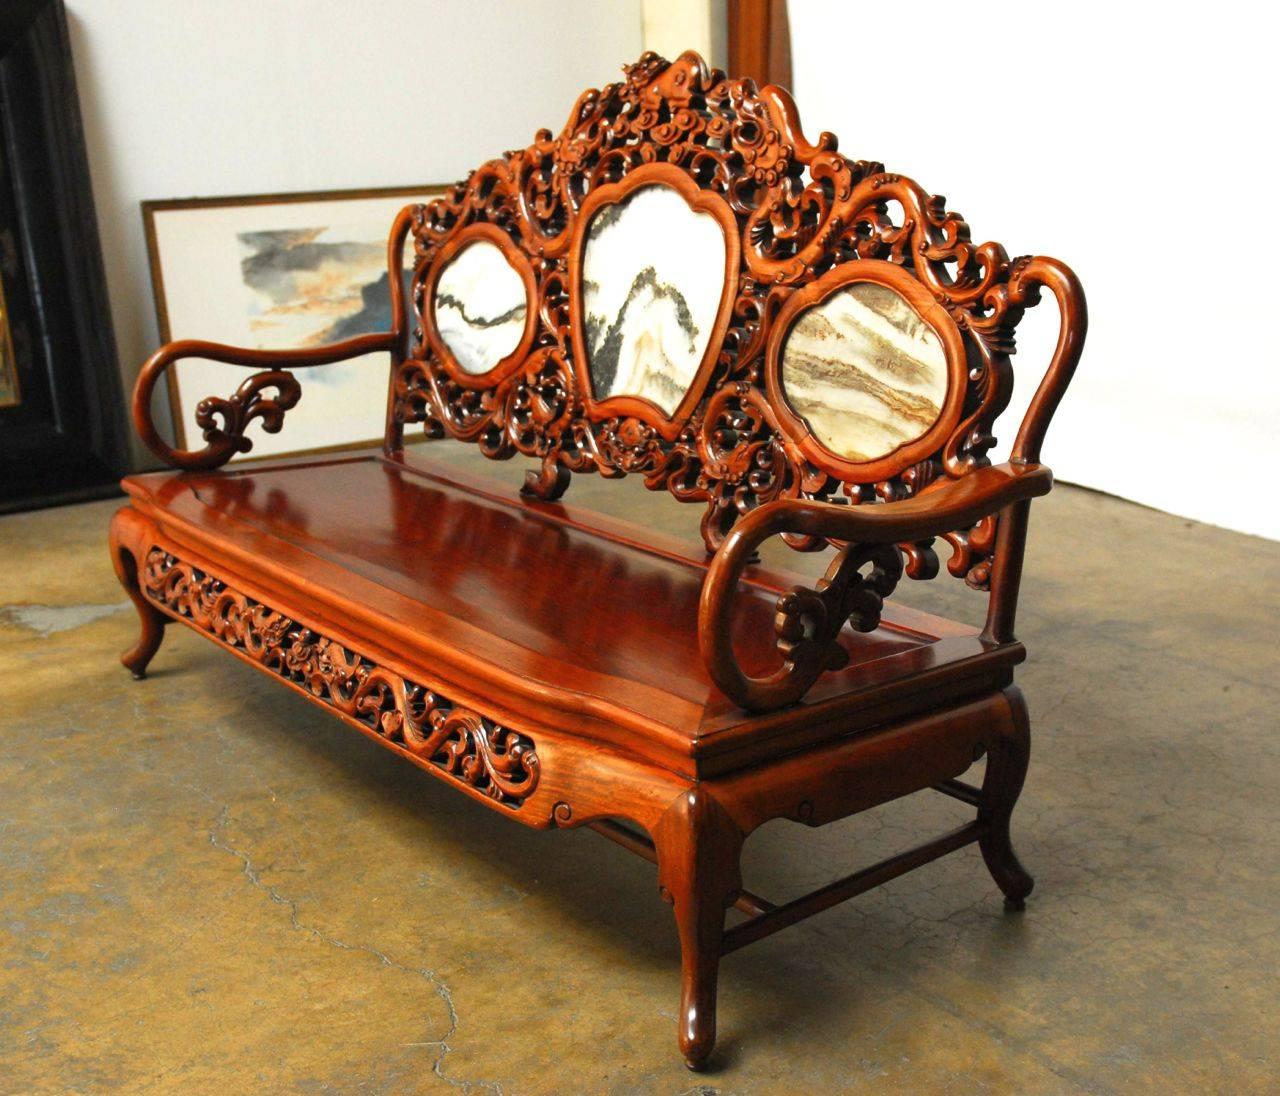 Exquisite hand-carved Chinese bench constructed of solid mixed rosewood and hardwood. High relief carvings of dragons, mythical beasts, phoenix and decorative elements. Centered on the back by three Chinese marble Dali or dreamstone panels meant to